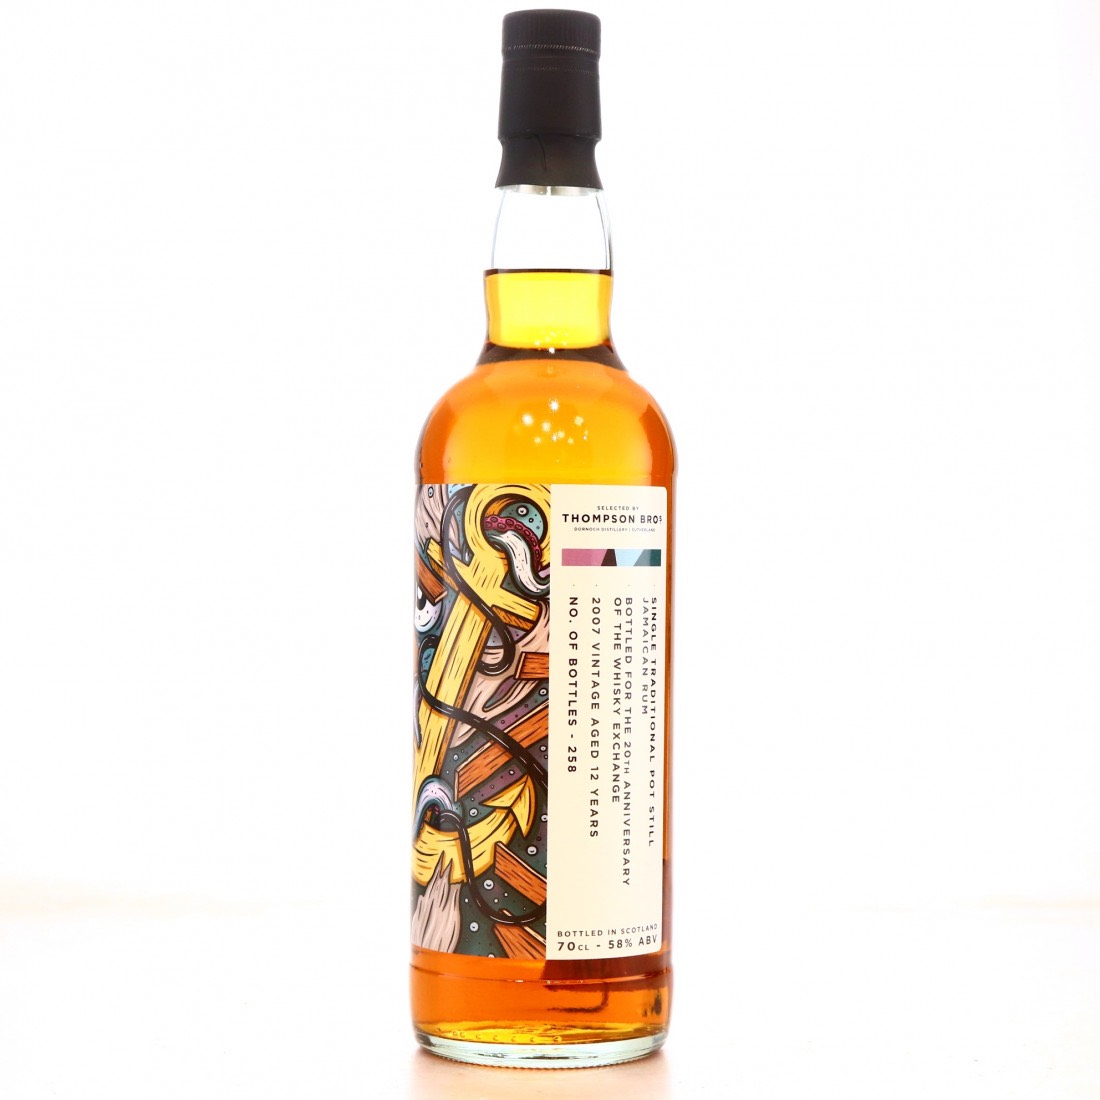 Bottle image of The Whisky Exchange